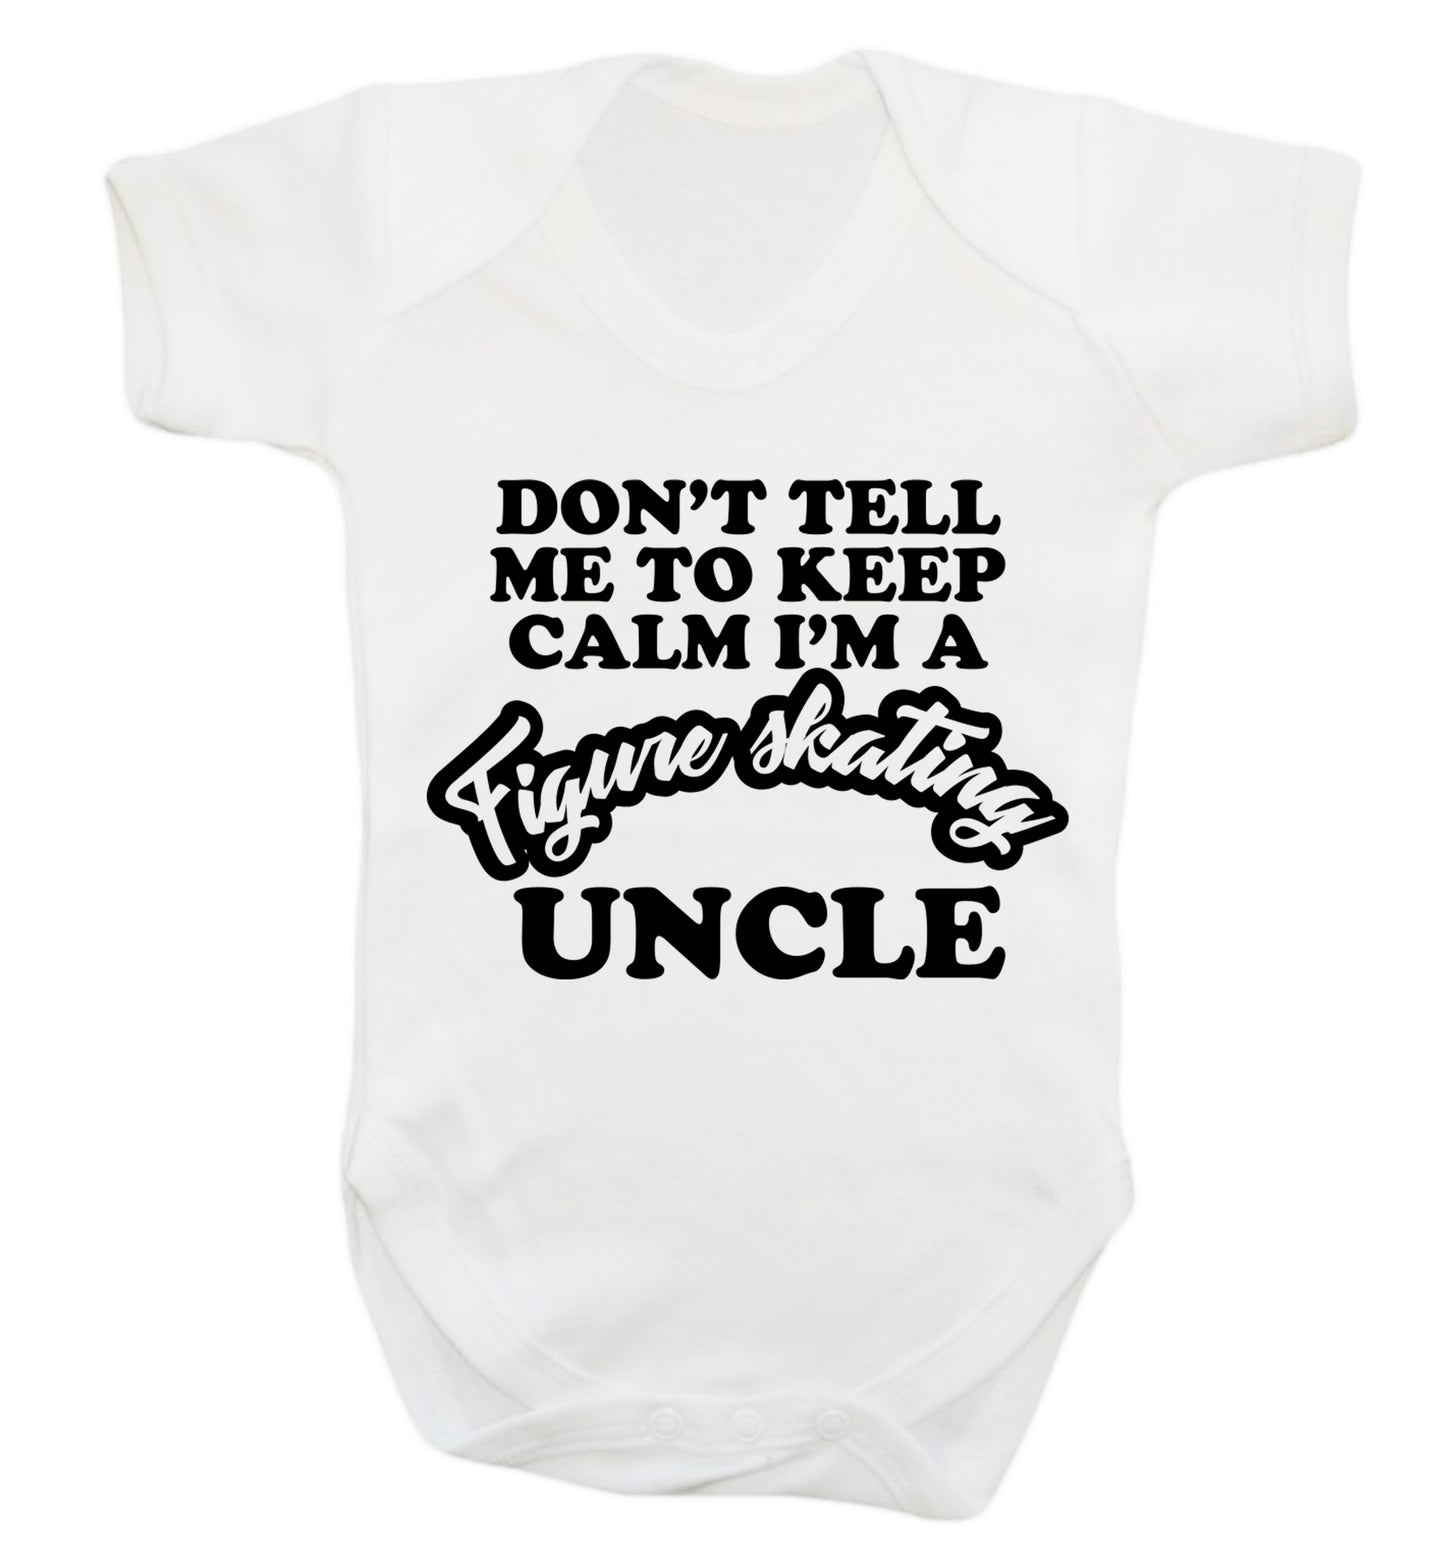 Don't tell me to keep calm I'm a figure skating uncle Baby Vest white 18-24 months